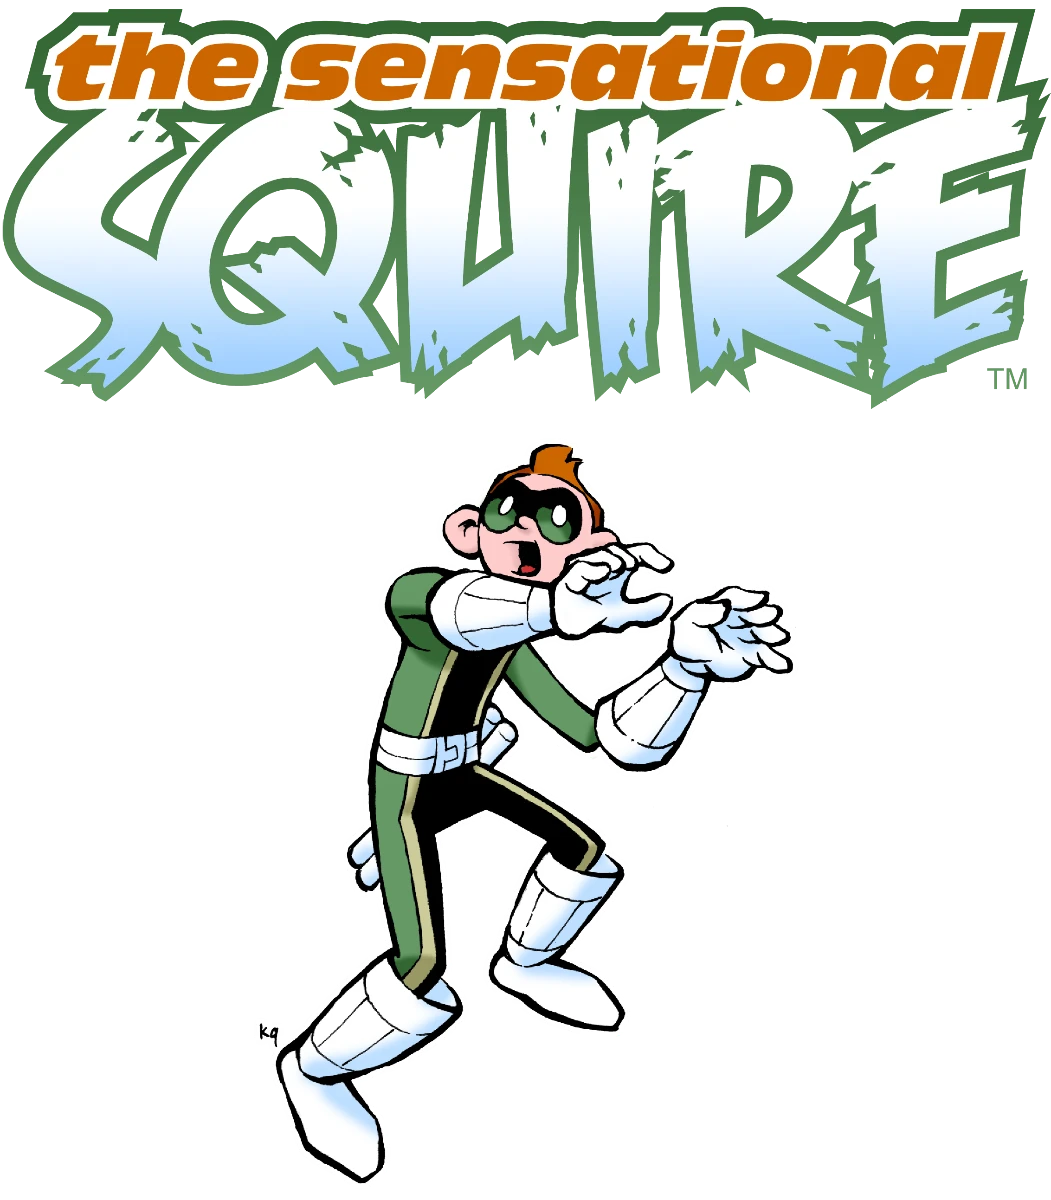 Comic book hero, The Sensational Squire, standing, seemingly frightened of something above his, as if something was falling towards him. He has red hair and a green mask, along with a green, black, and yellow uniform, with large white boots and gloves. He's very skinny for a superhero.